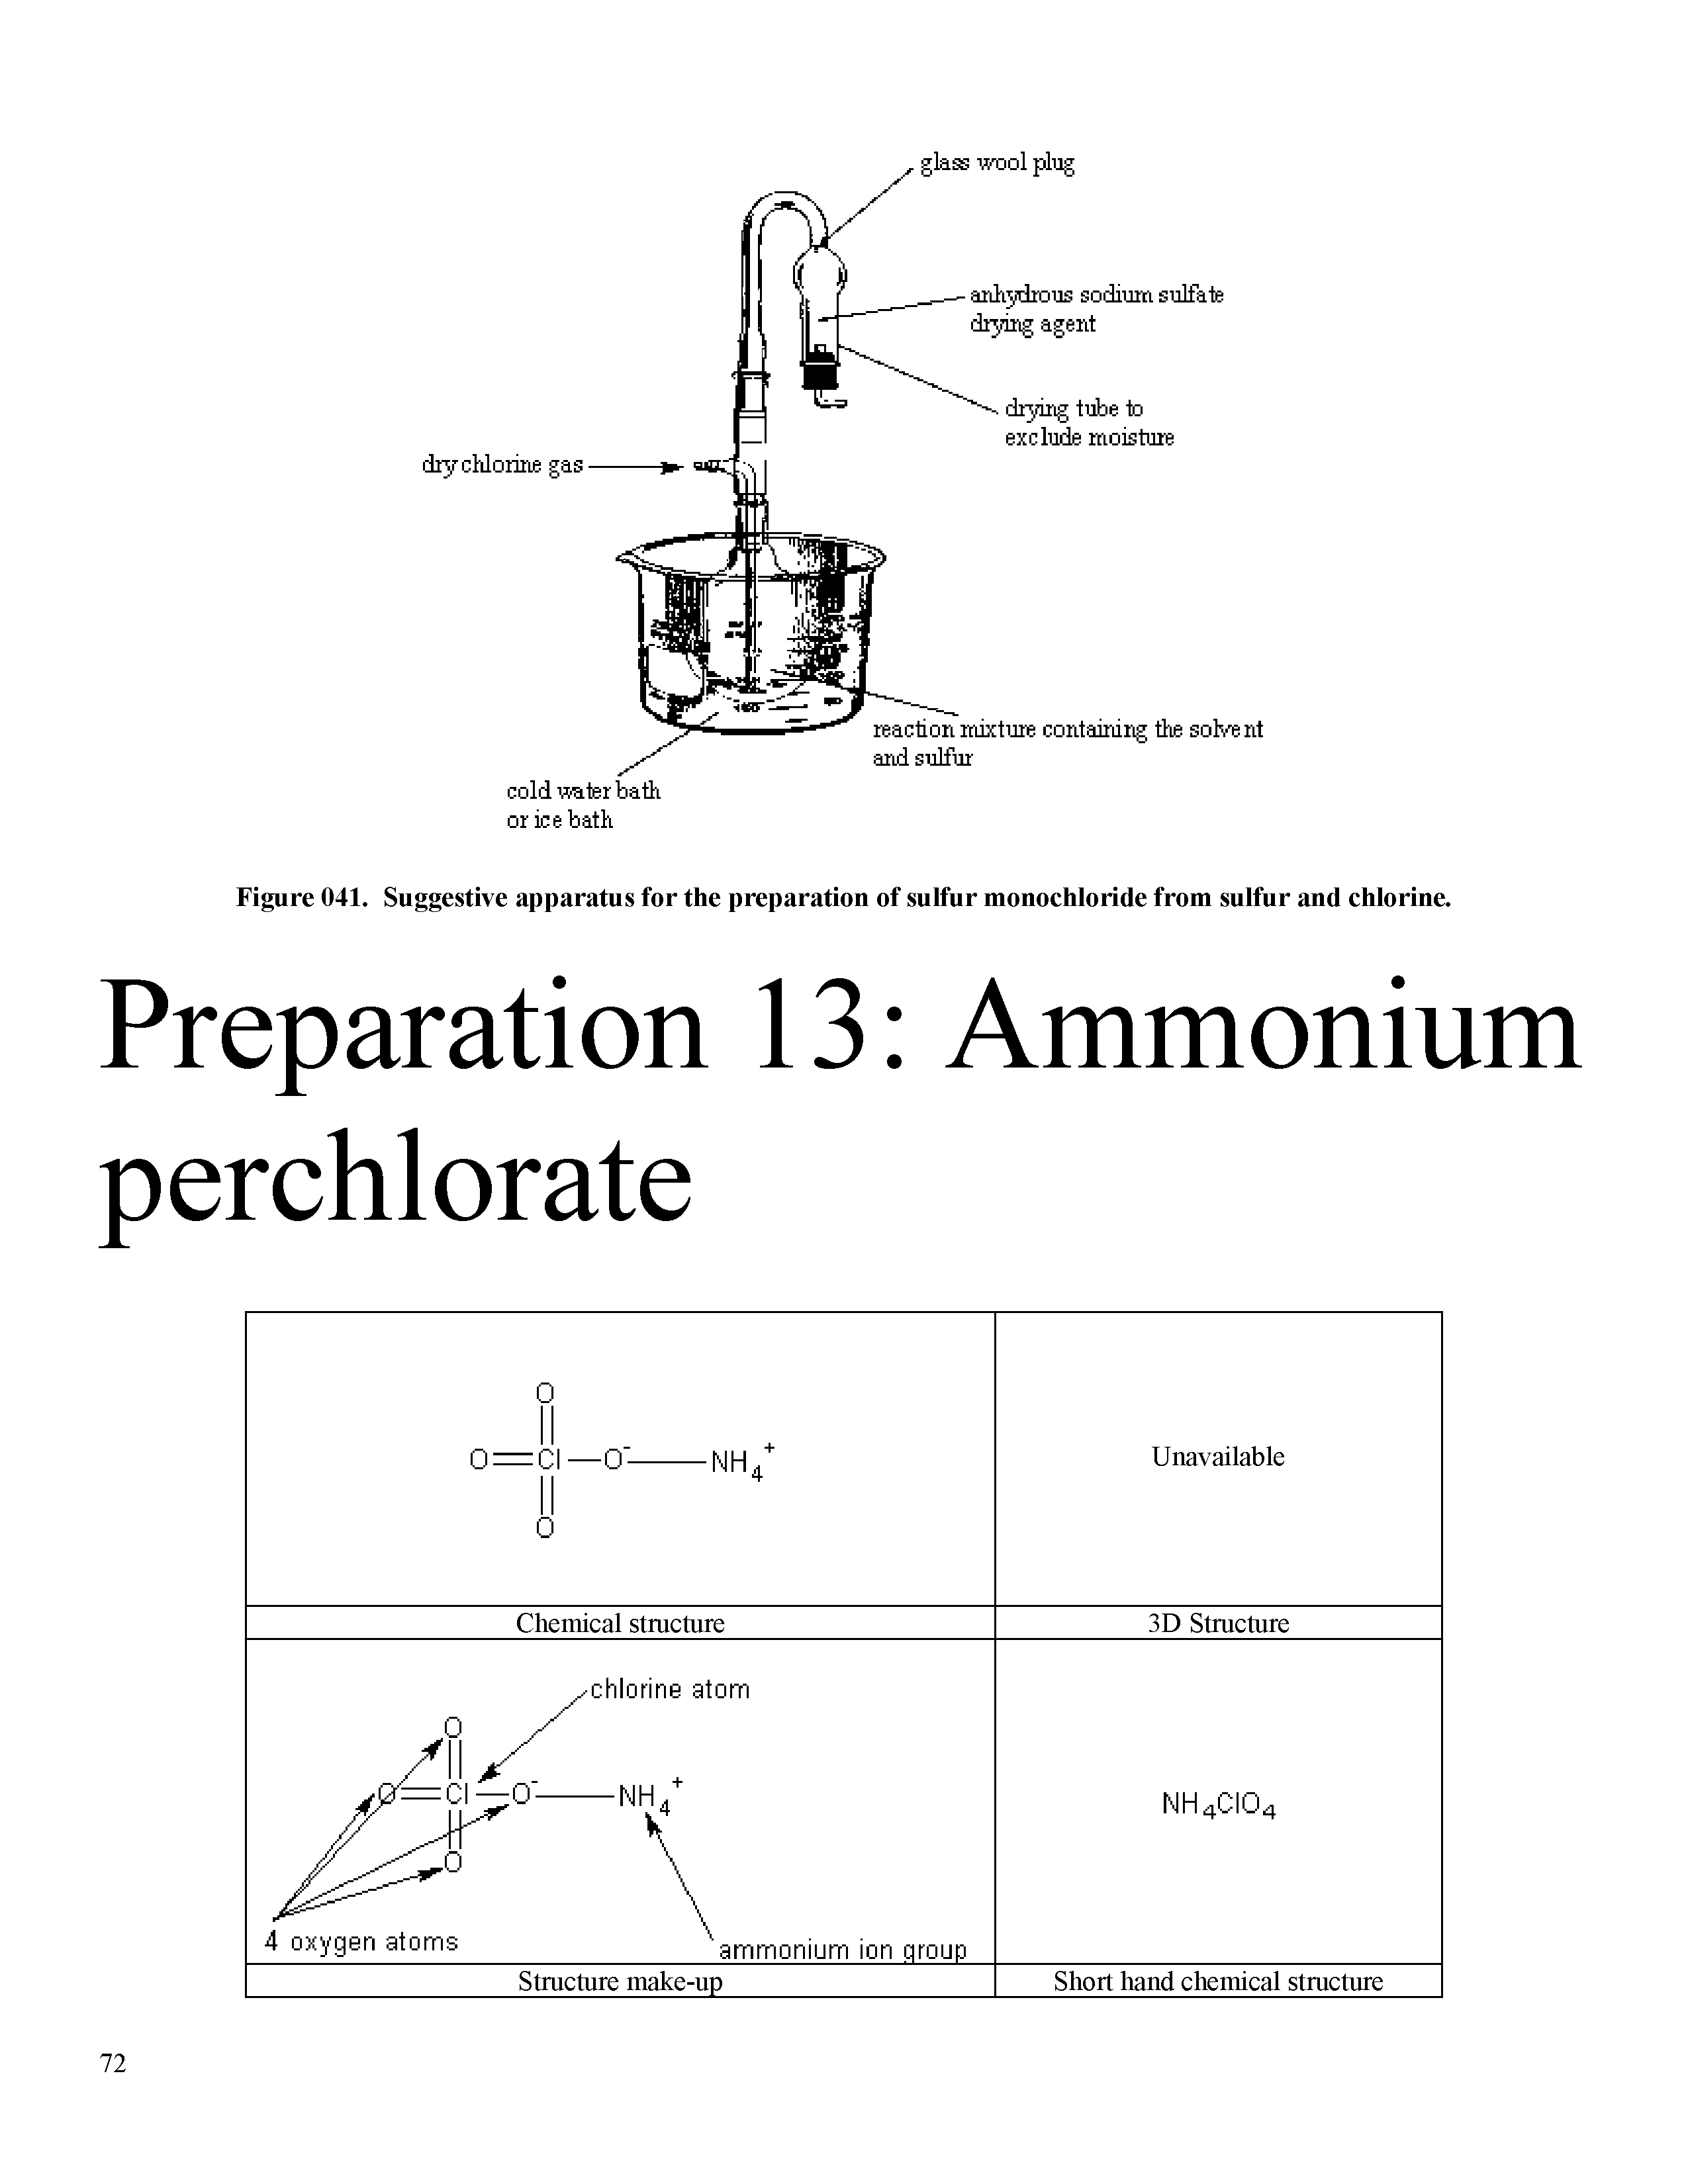 Figure 041. Suggestive apparatus for the preparation of sulfur monochloride from sulfur and chlorine.